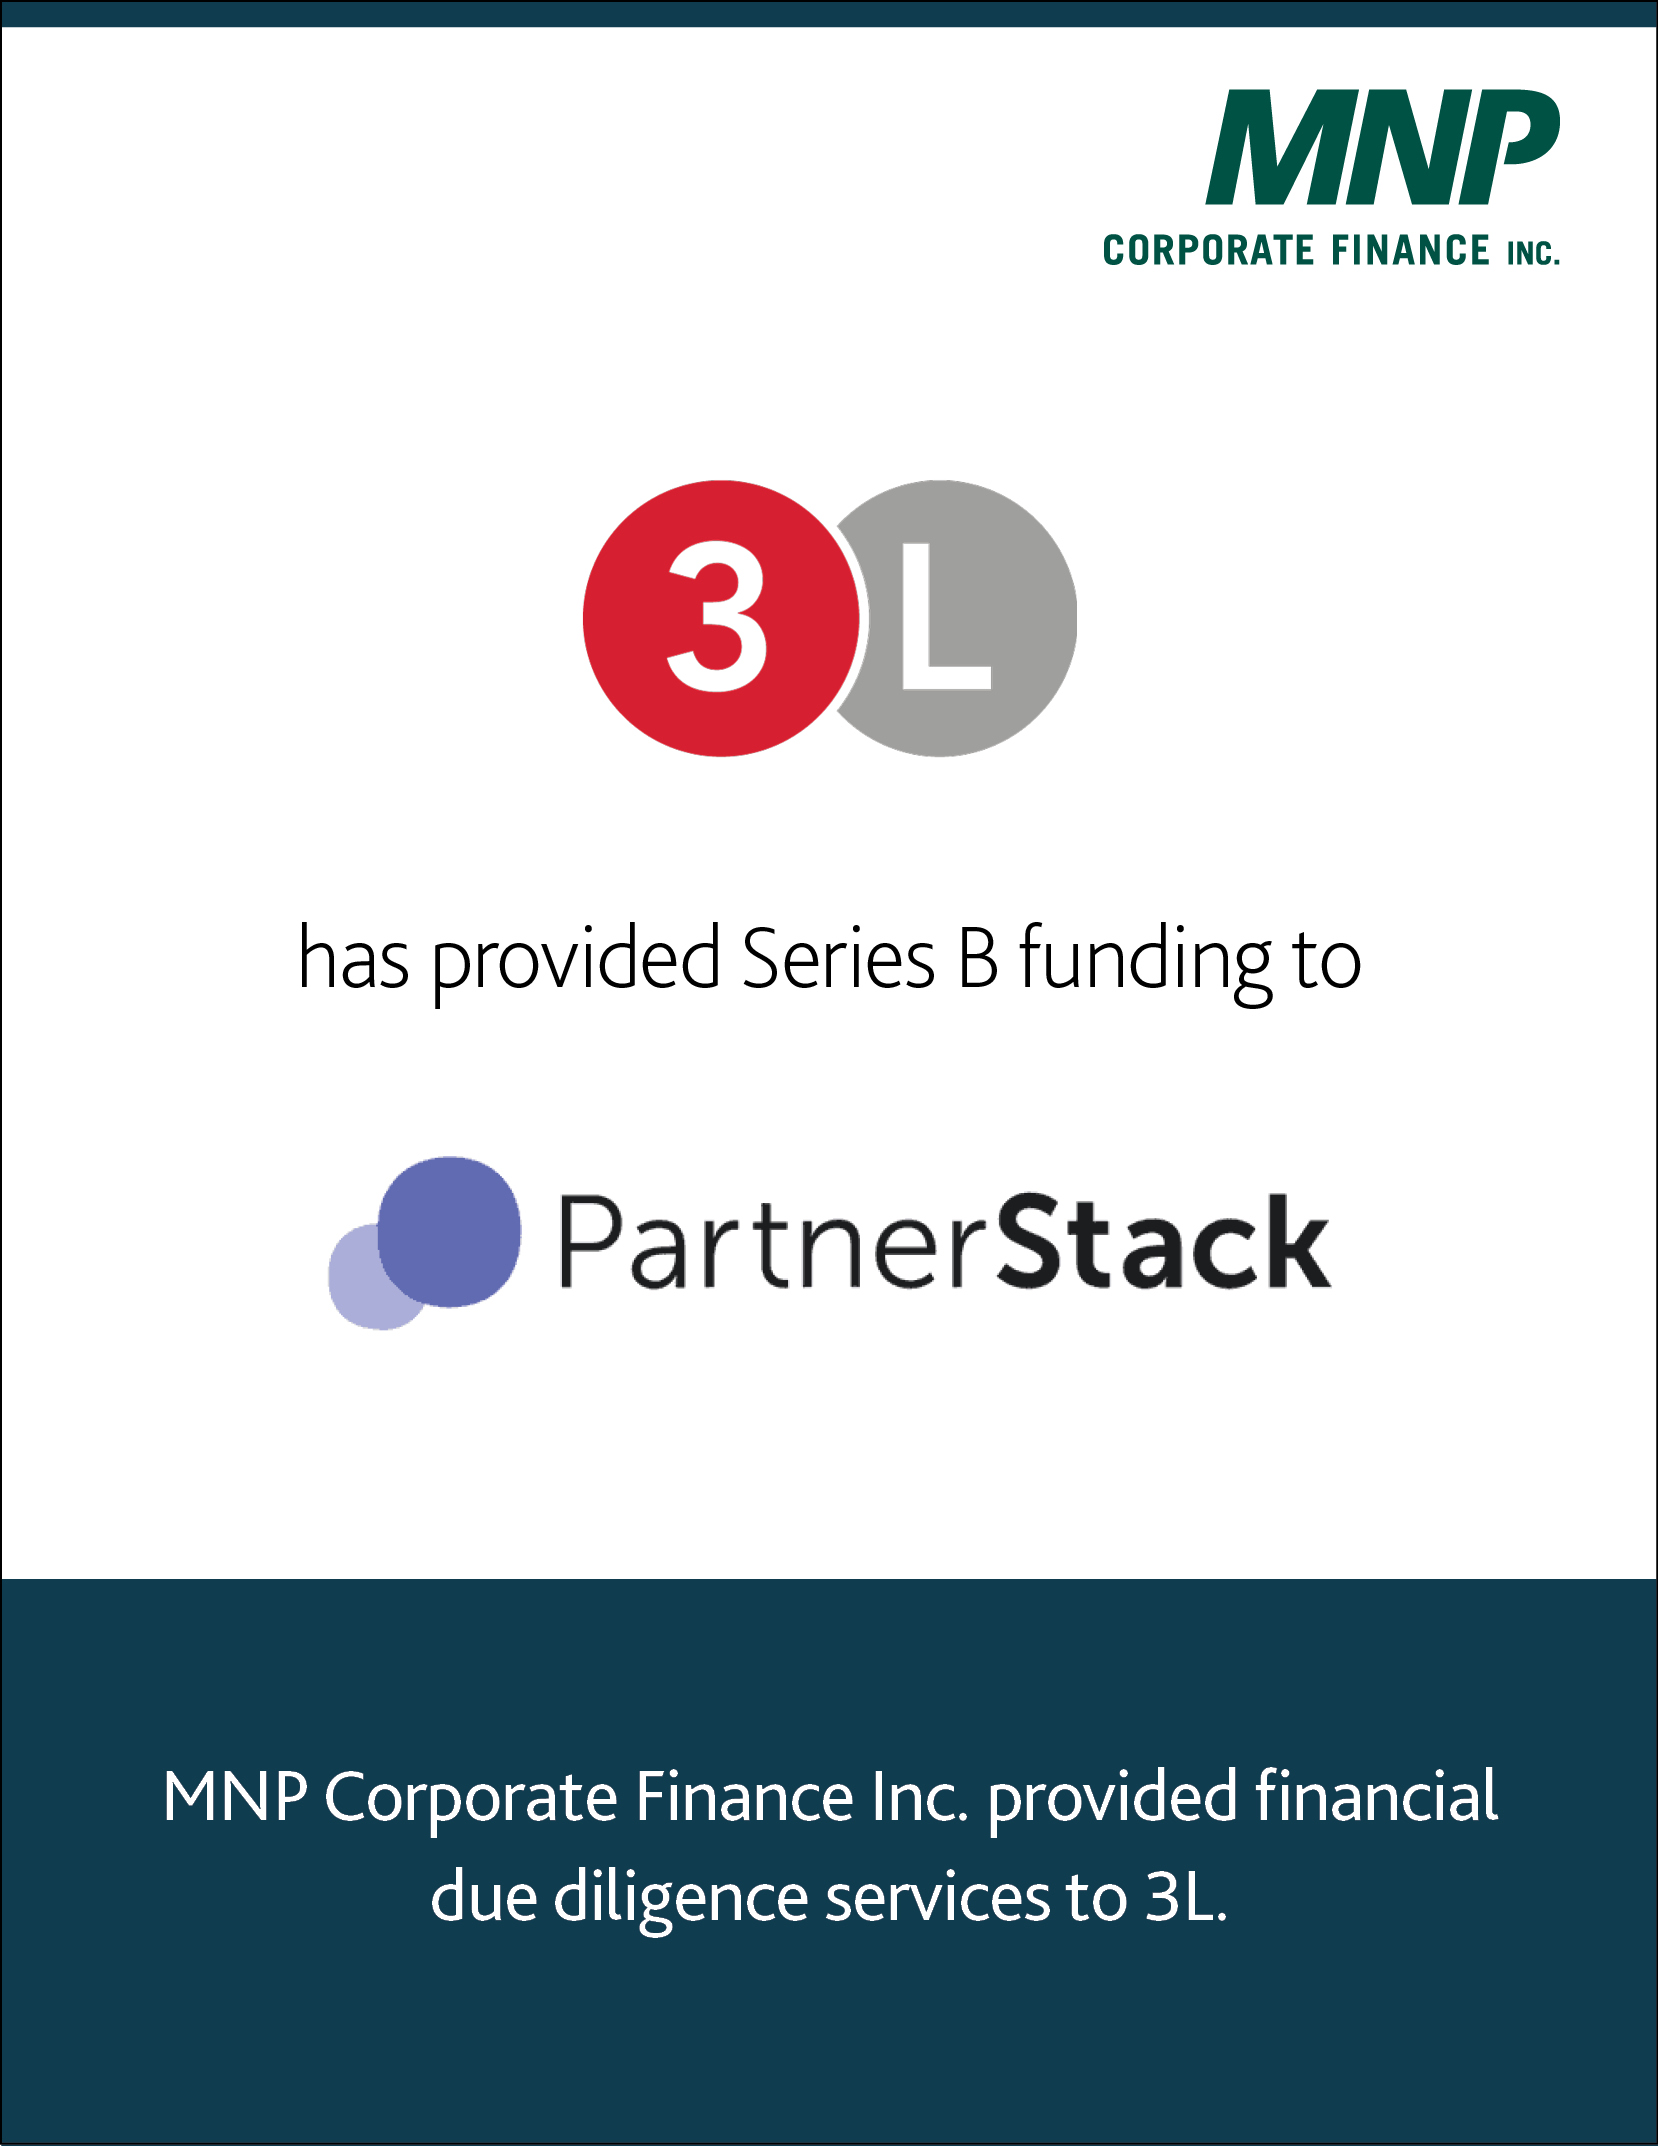 3L has provided Series B funding to PartnerStack